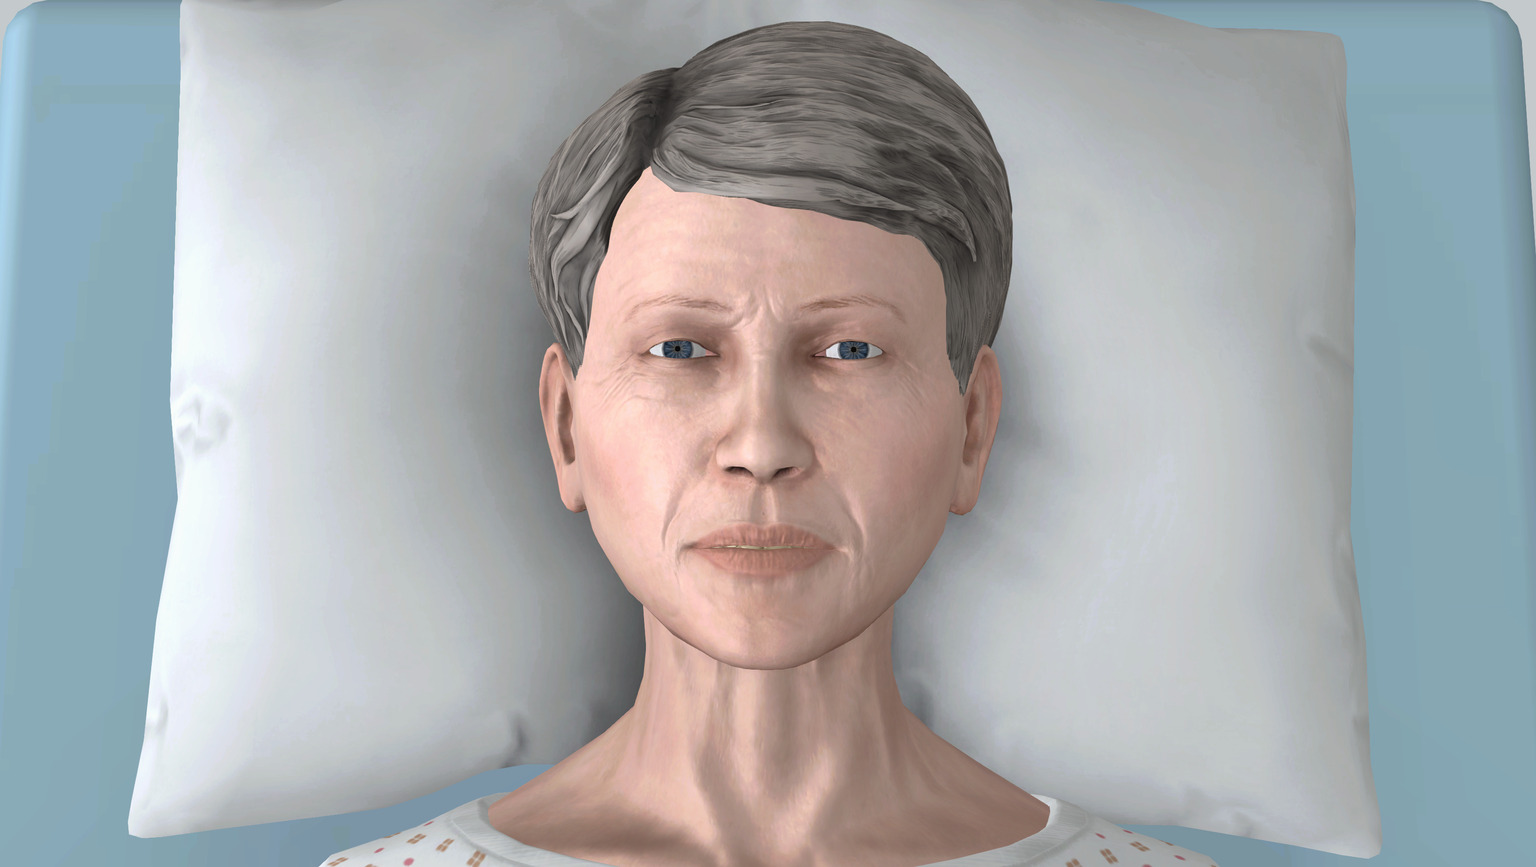 Simulation image of patient in hospital